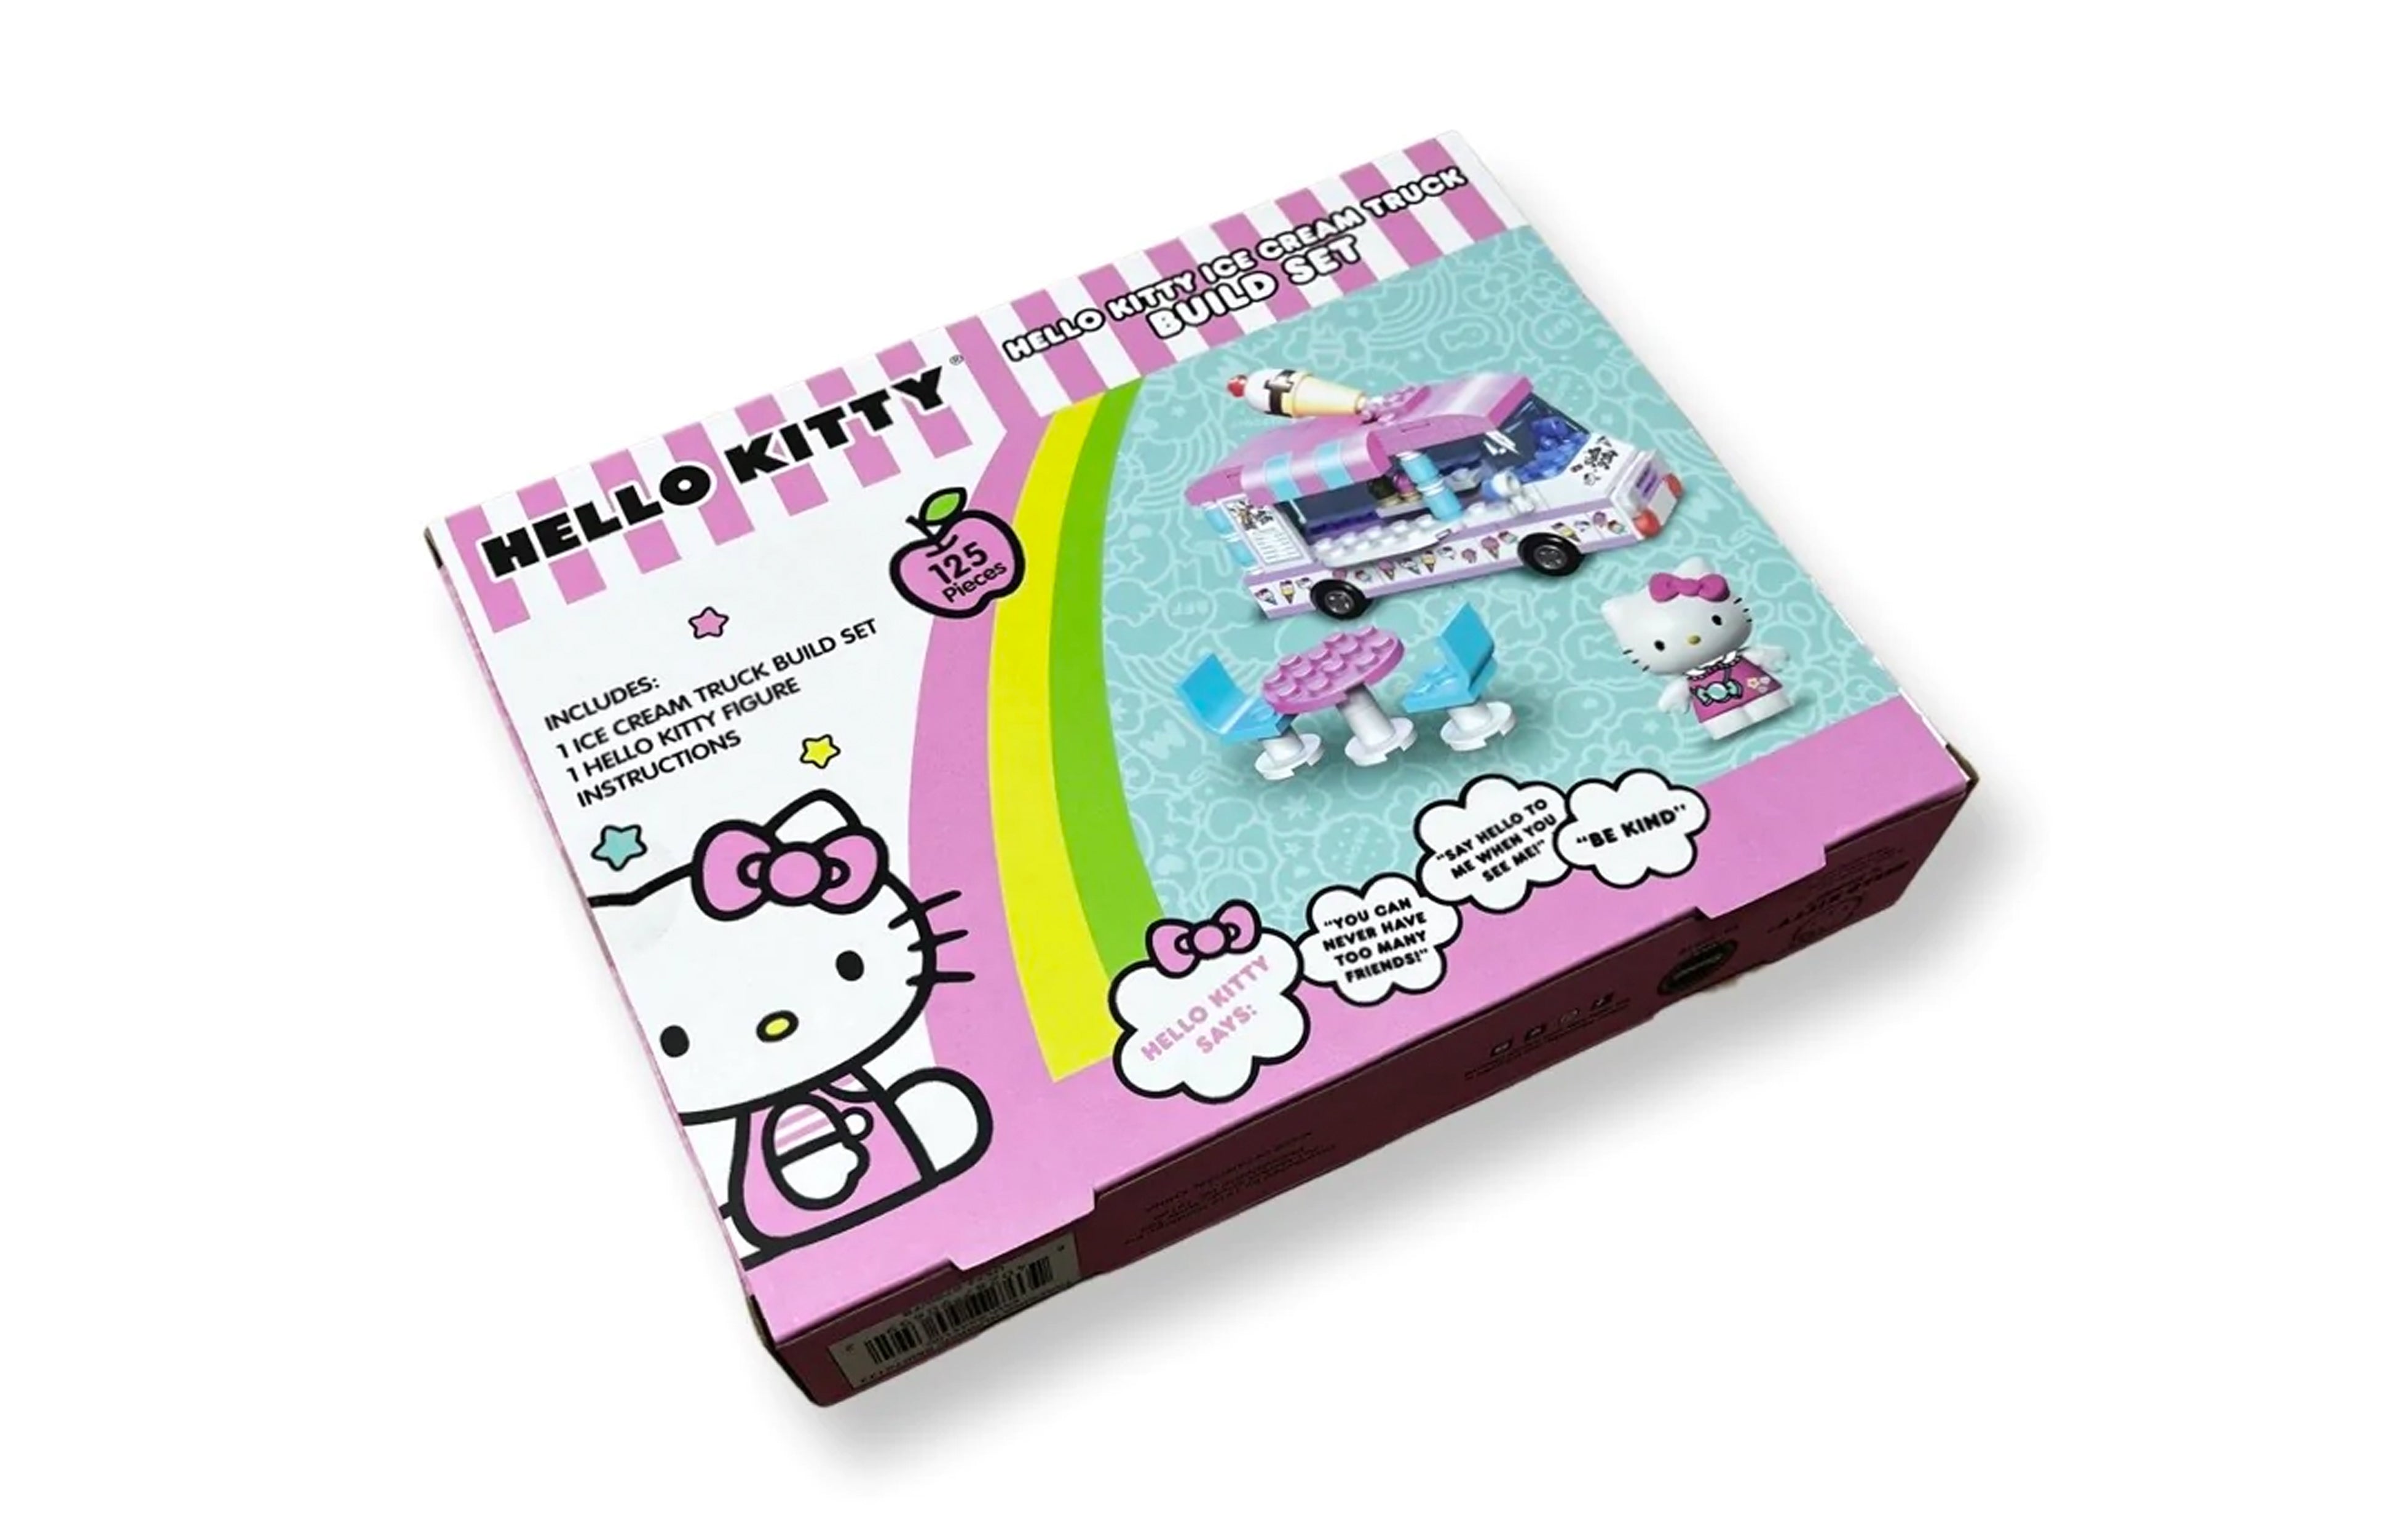 Ice Cream Truck Build Set by Hello Kitty - Galerie F